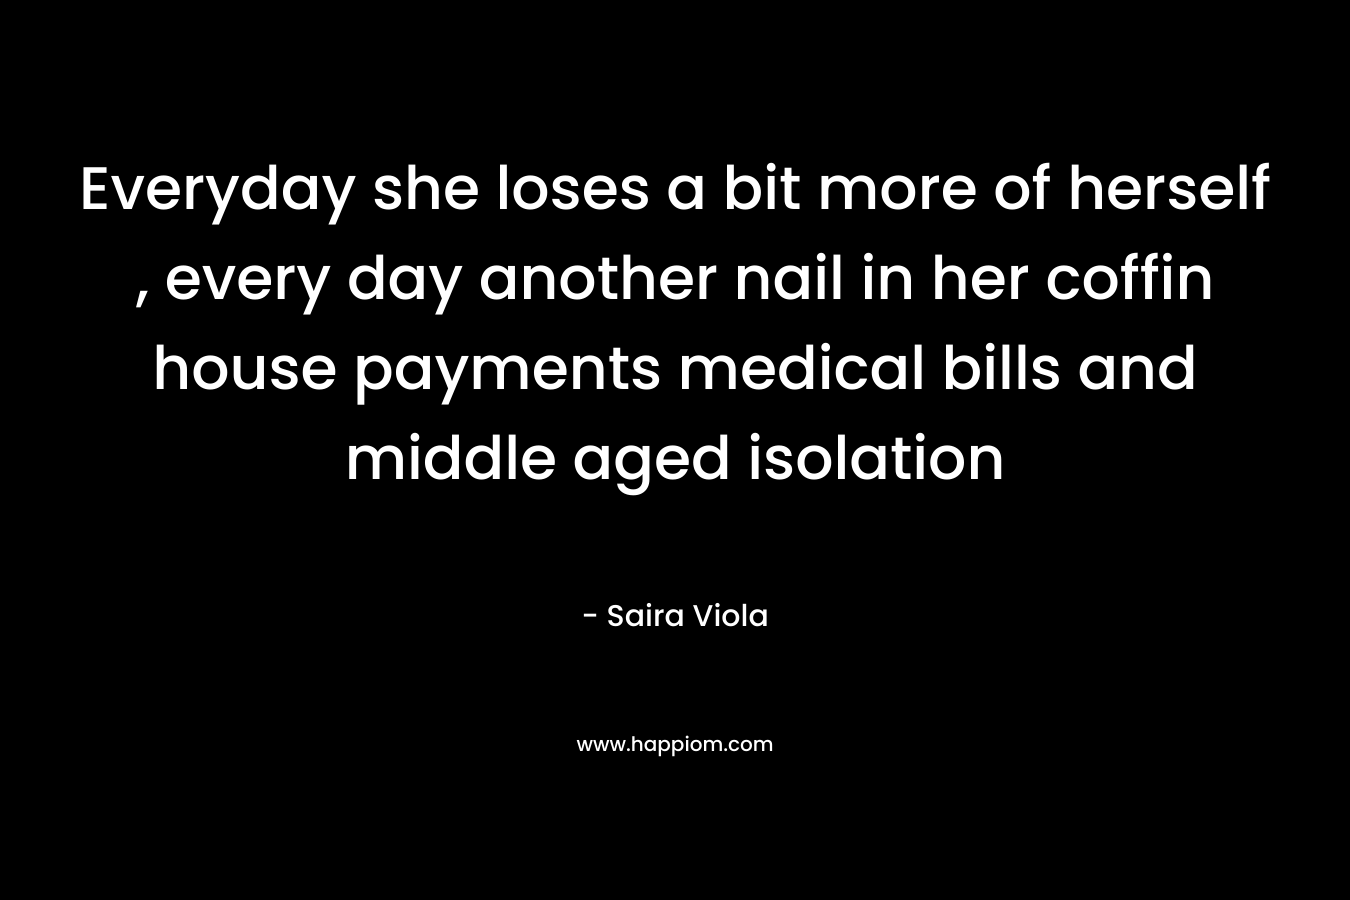 Everyday she loses a bit more of herself , every day another nail in her coffin house payments medical bills and middle aged isolation – Saira Viola